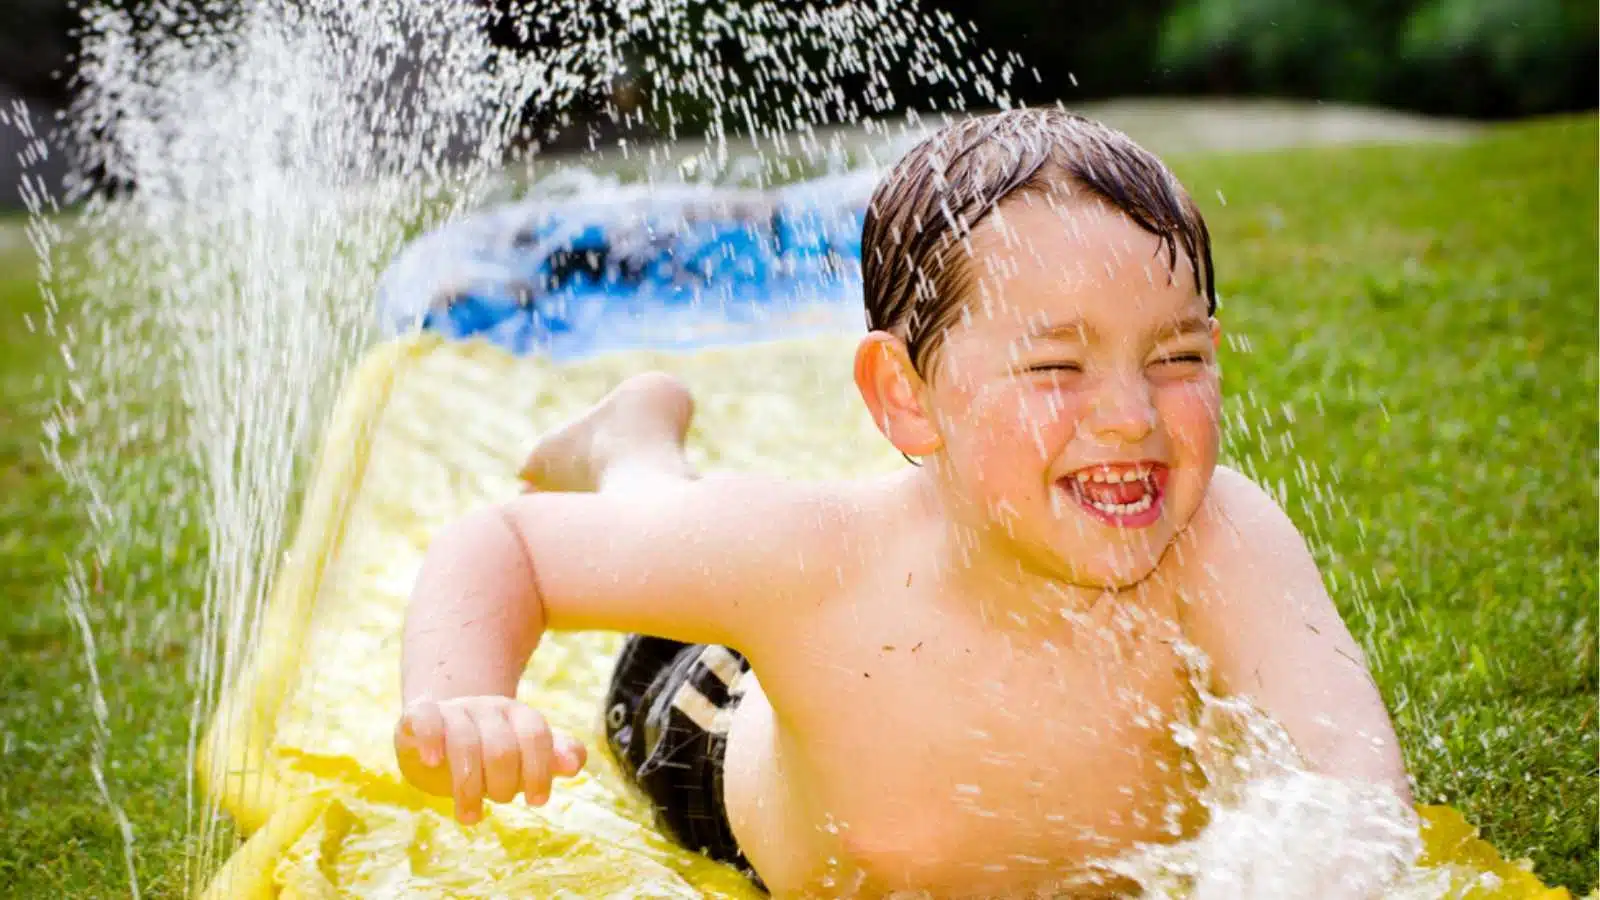 Child playing in garden hose water